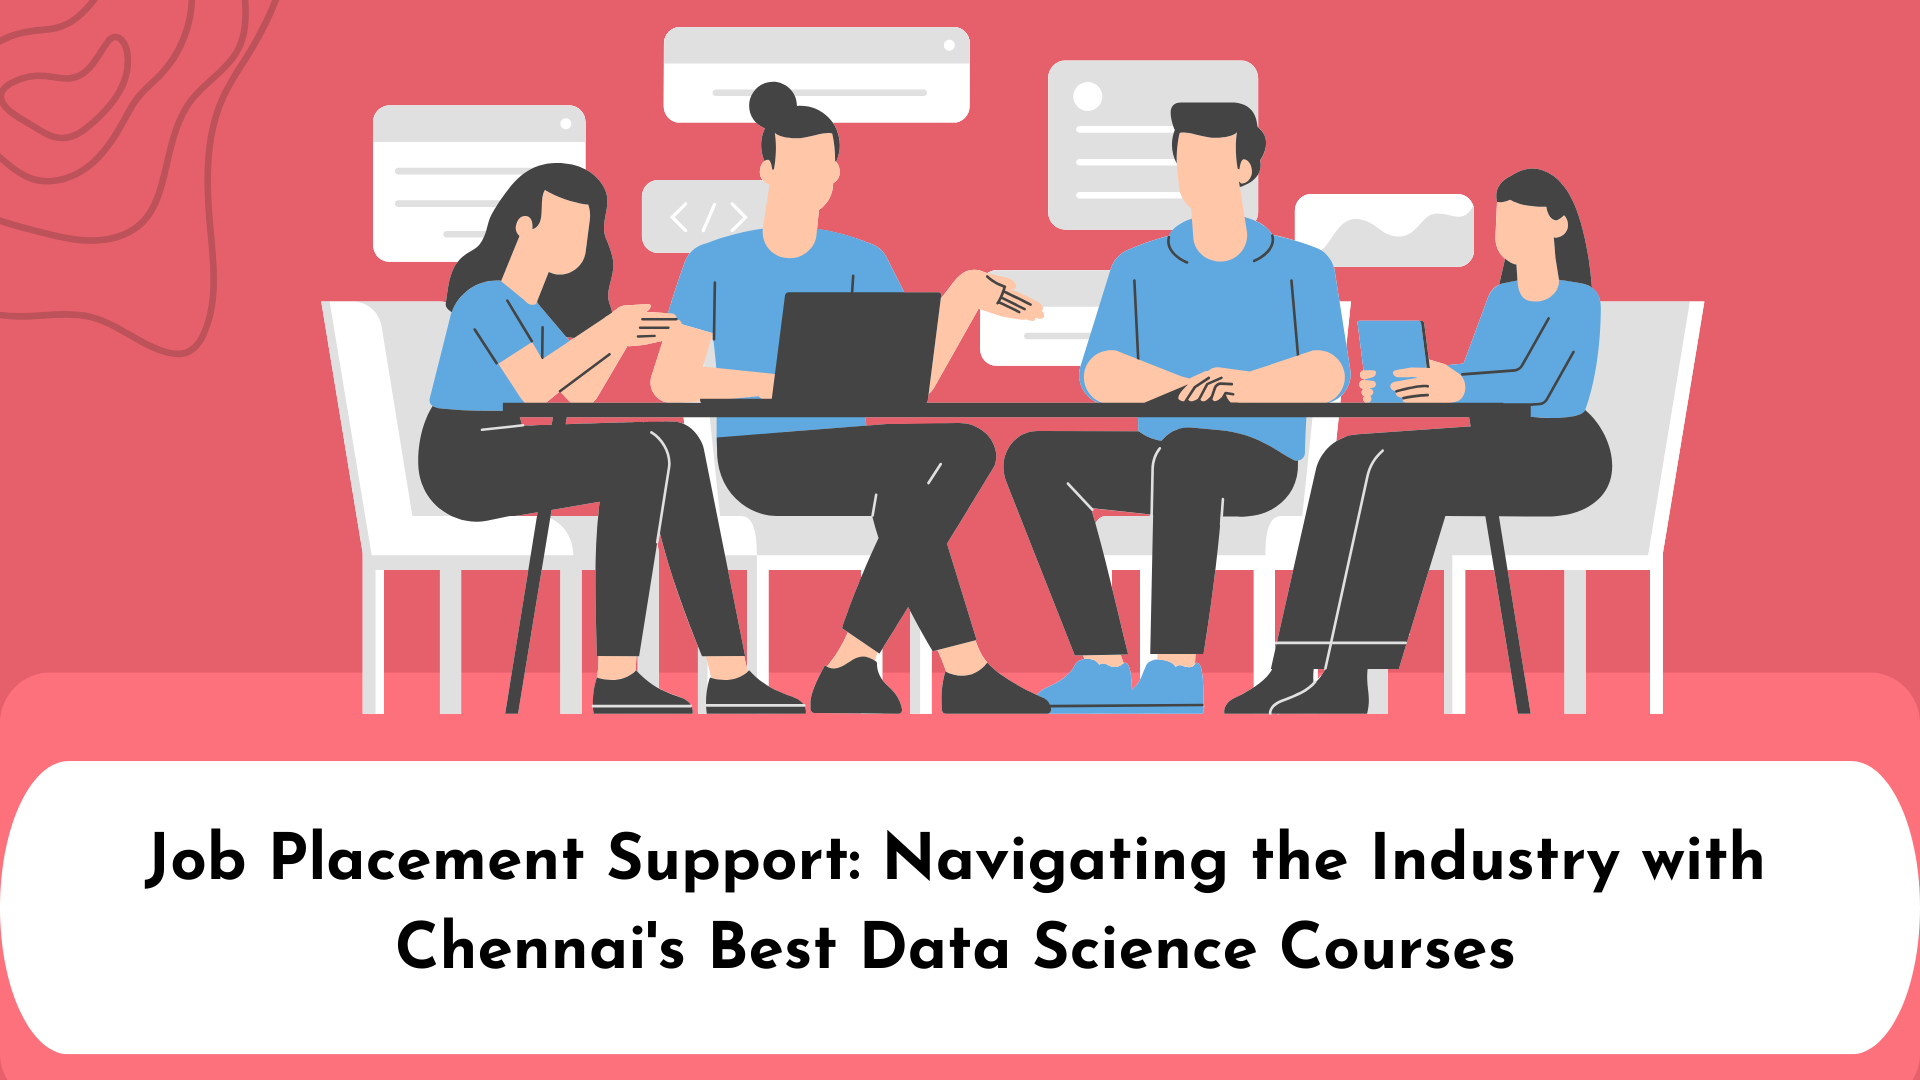 You are currently viewing Job Placement Support: Navigating the Industry with Chennai’s Best Data Science Courses